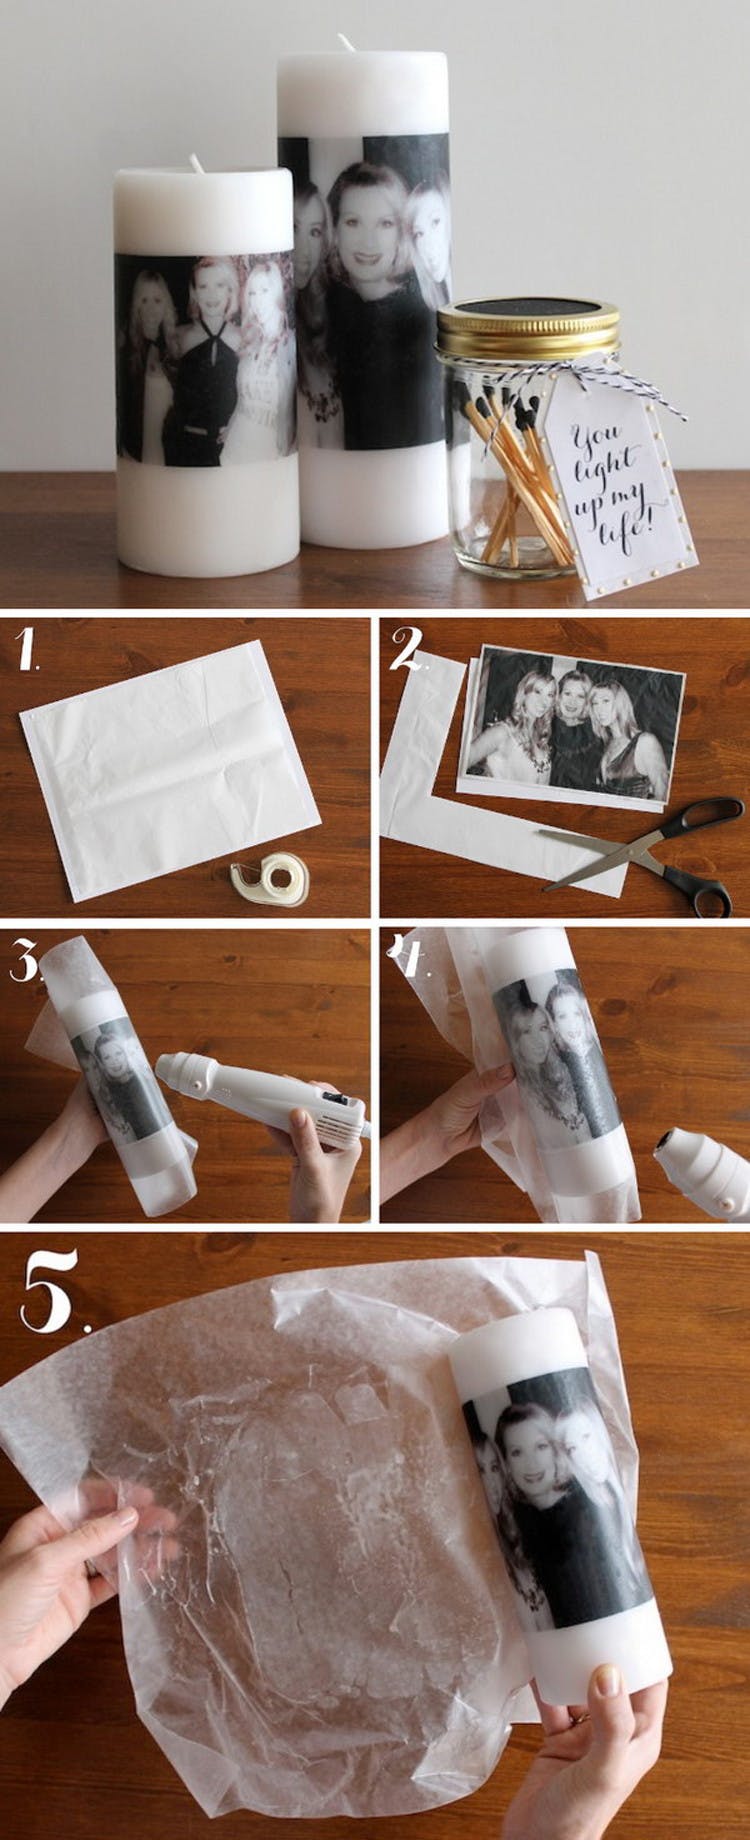 Transfer photos printed on tissue paper to a candle.